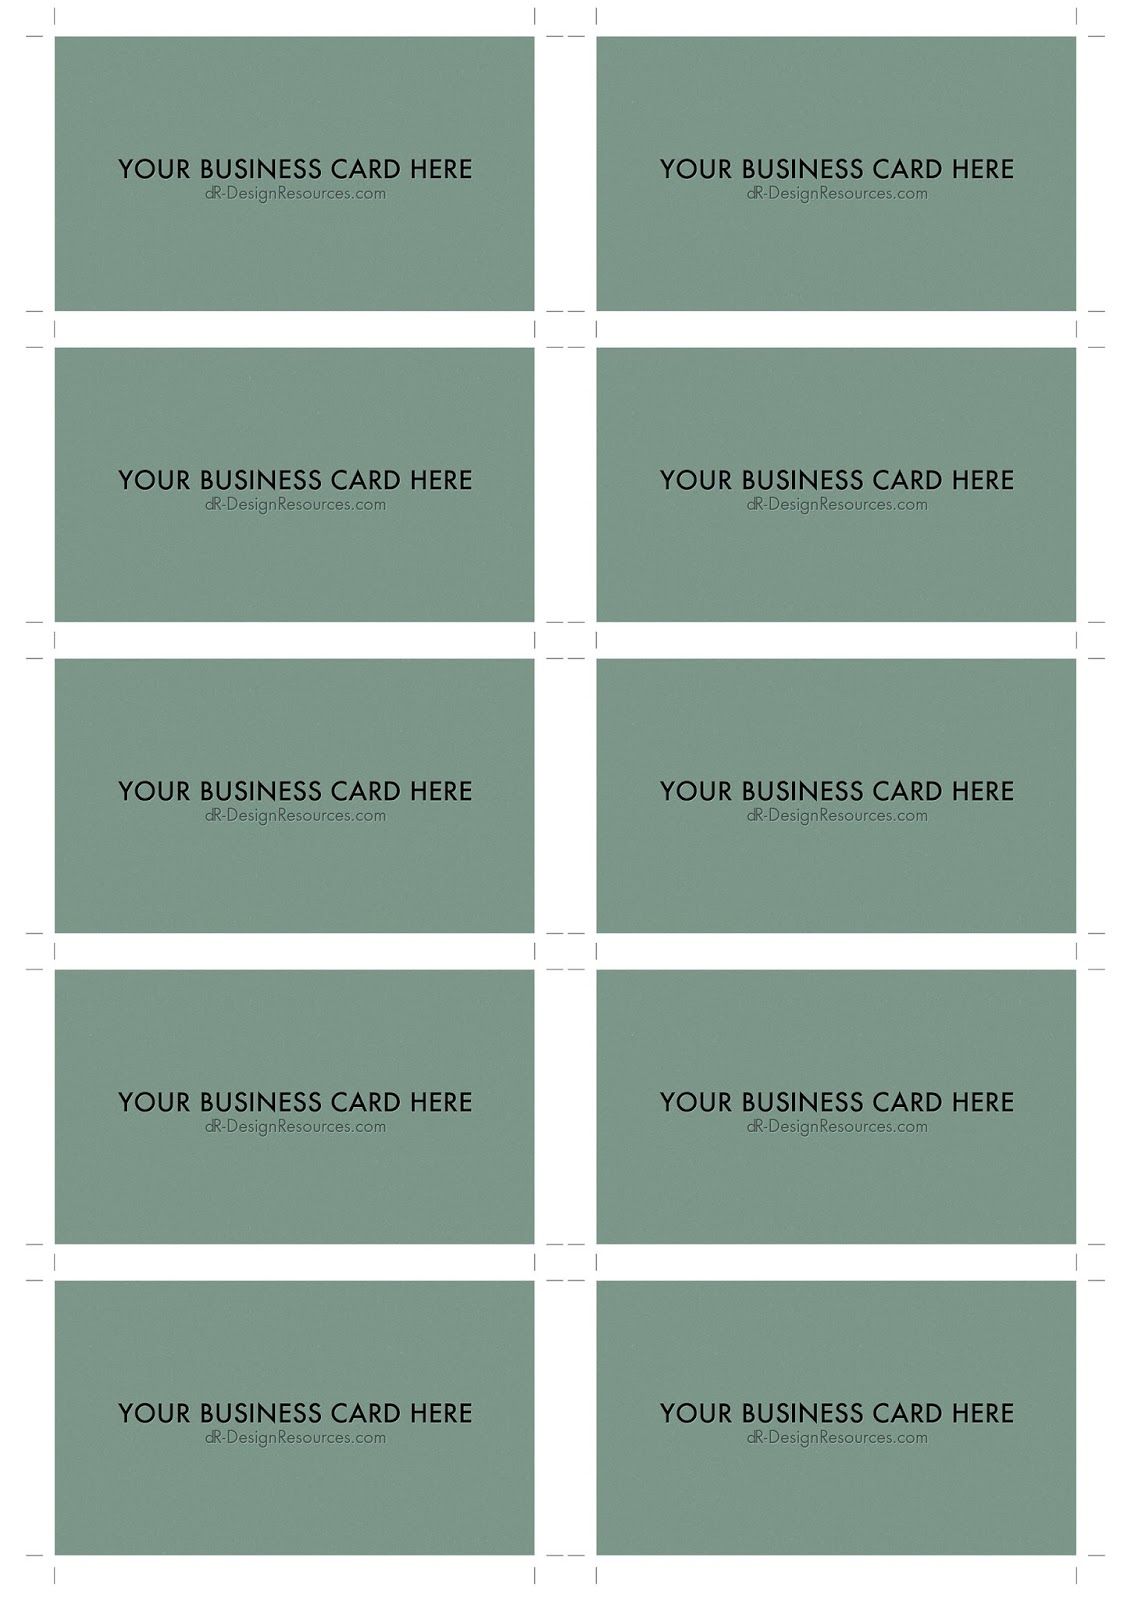 how to print multiple business cards on one sheet pdf 4